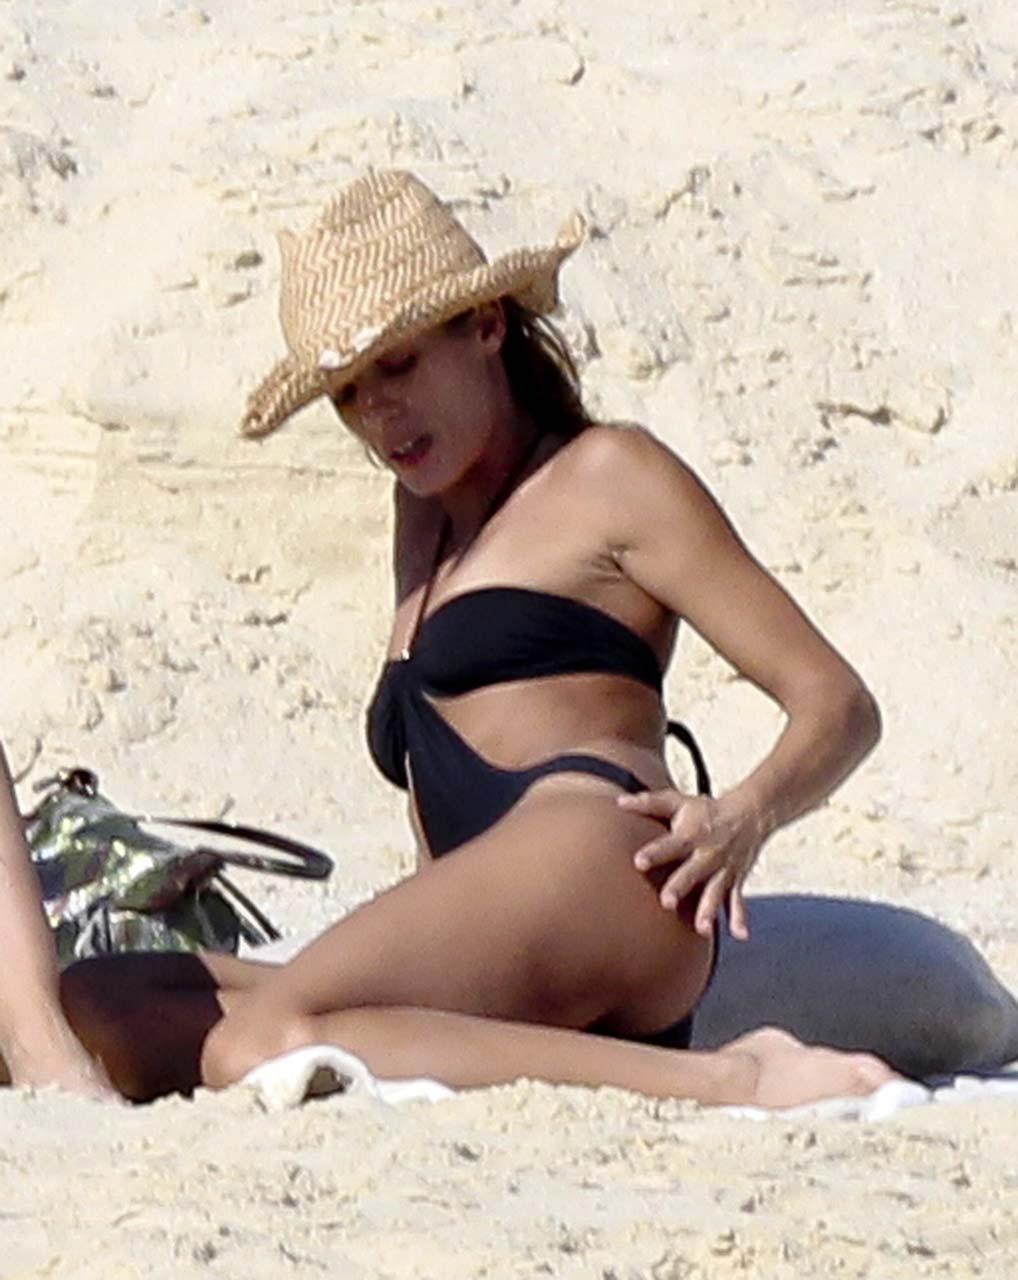 Elisabetta Canalis showing her great body and ass in bikini and nipple slip #75320207